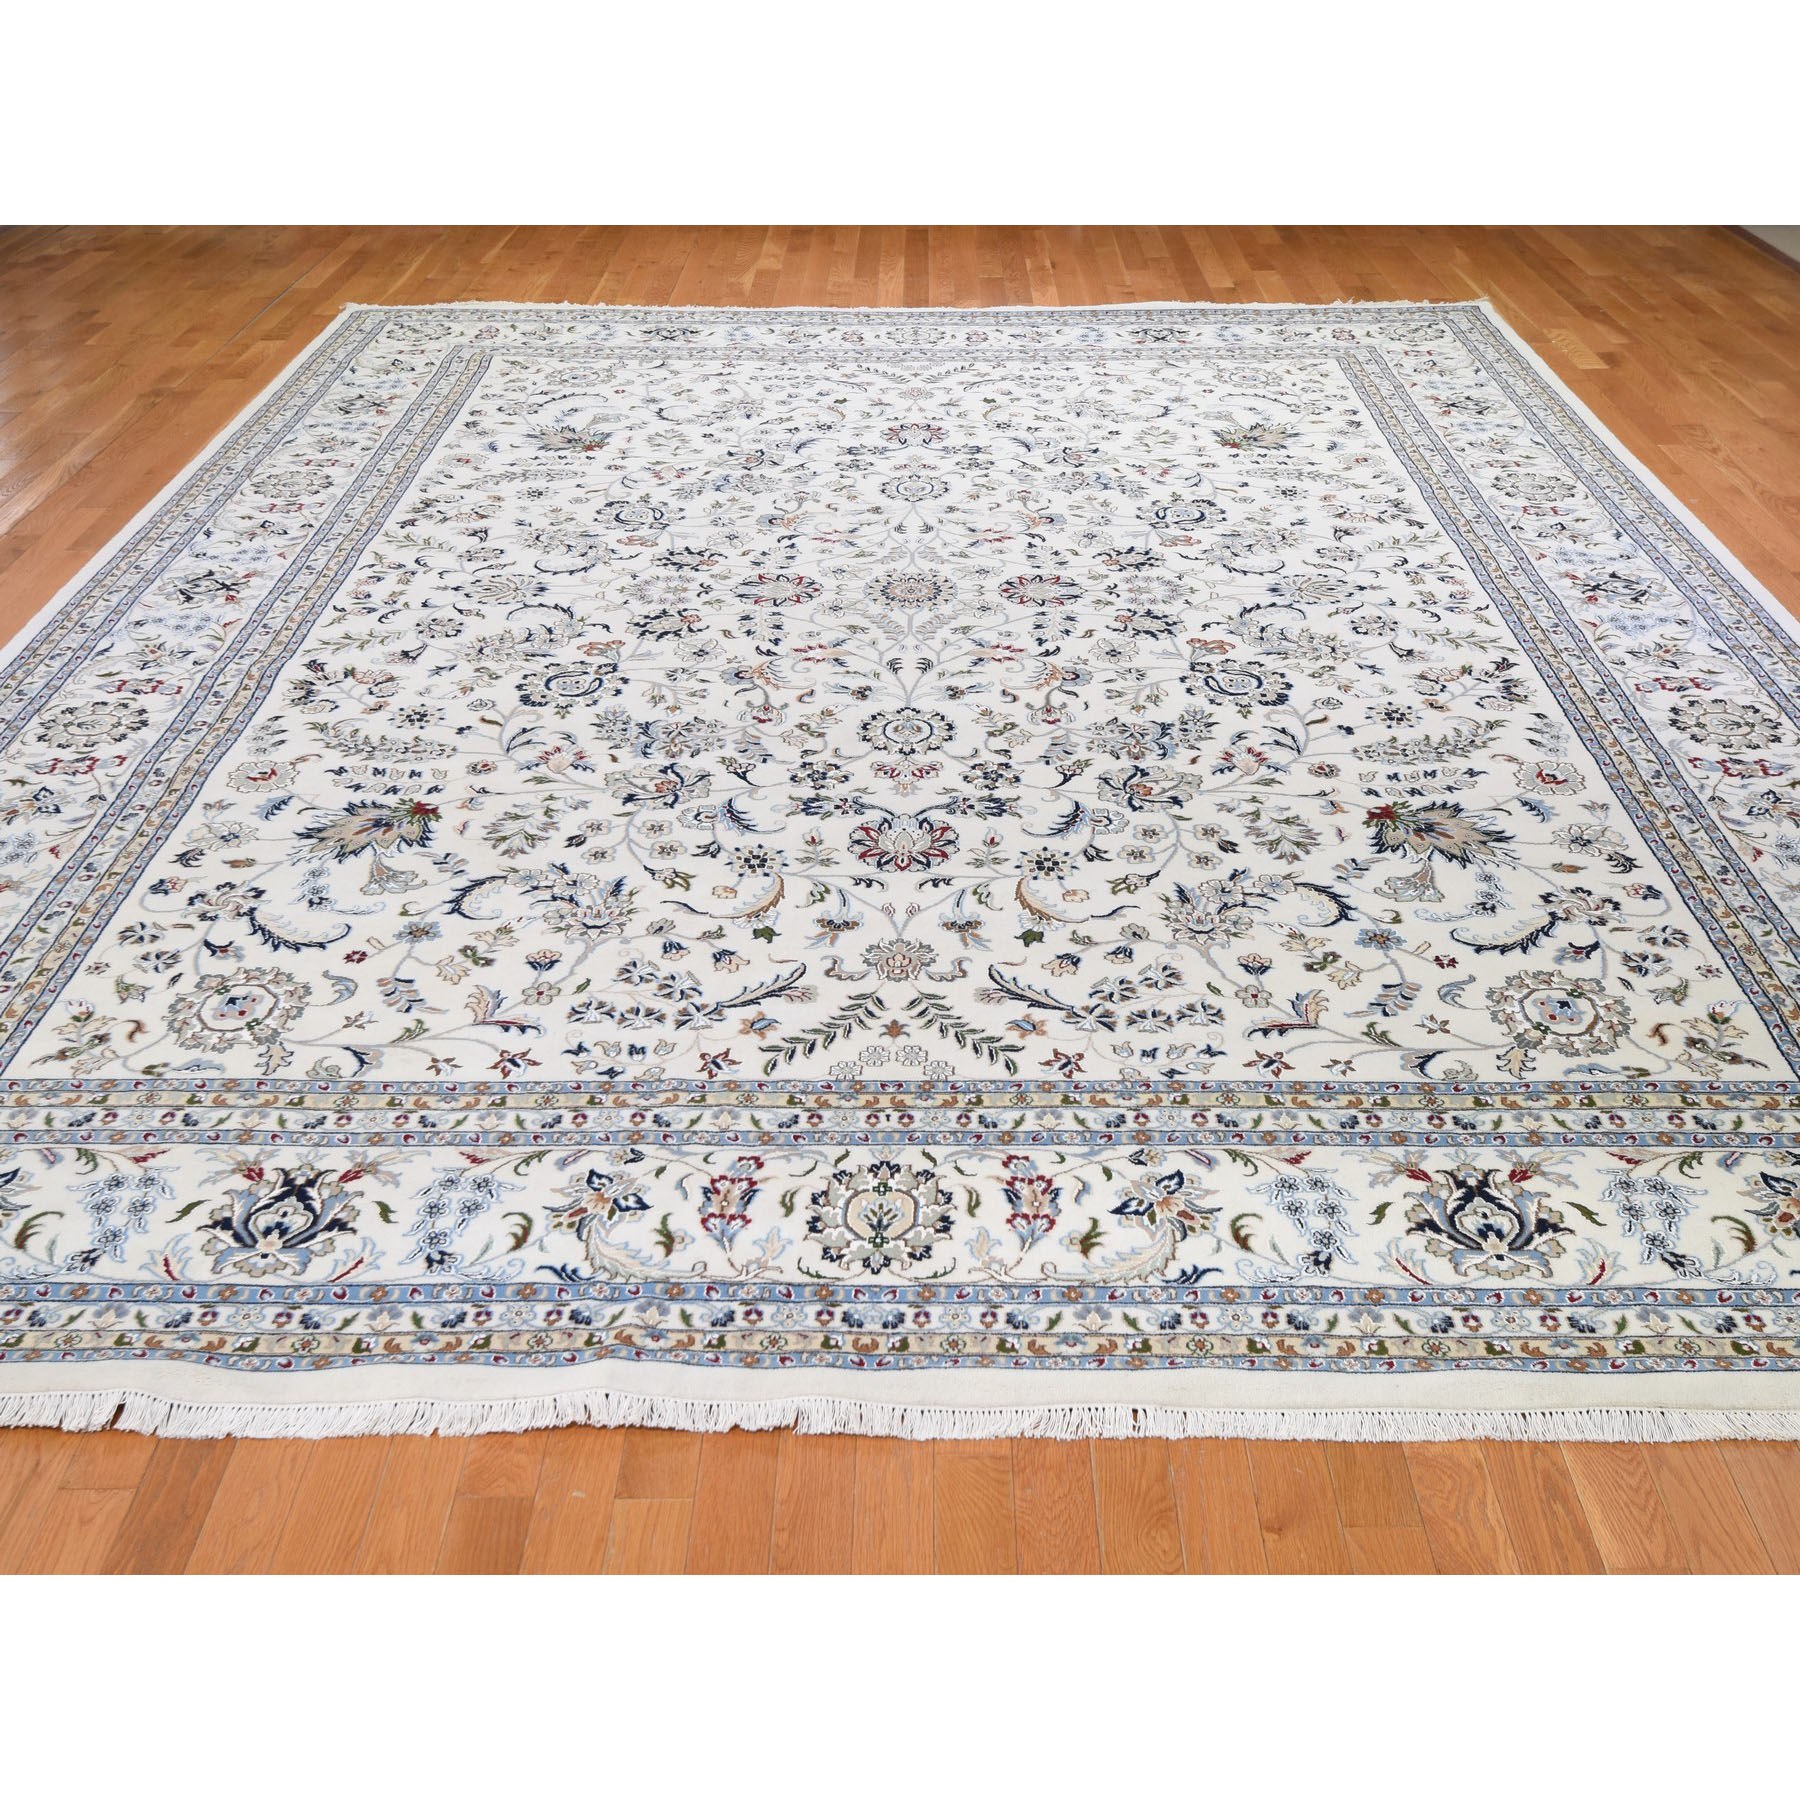 11-8 x15- Oversized Ivory Nain Wool And Silk All Over Design 250 KPSI Hand Knotted Oriental Rug 